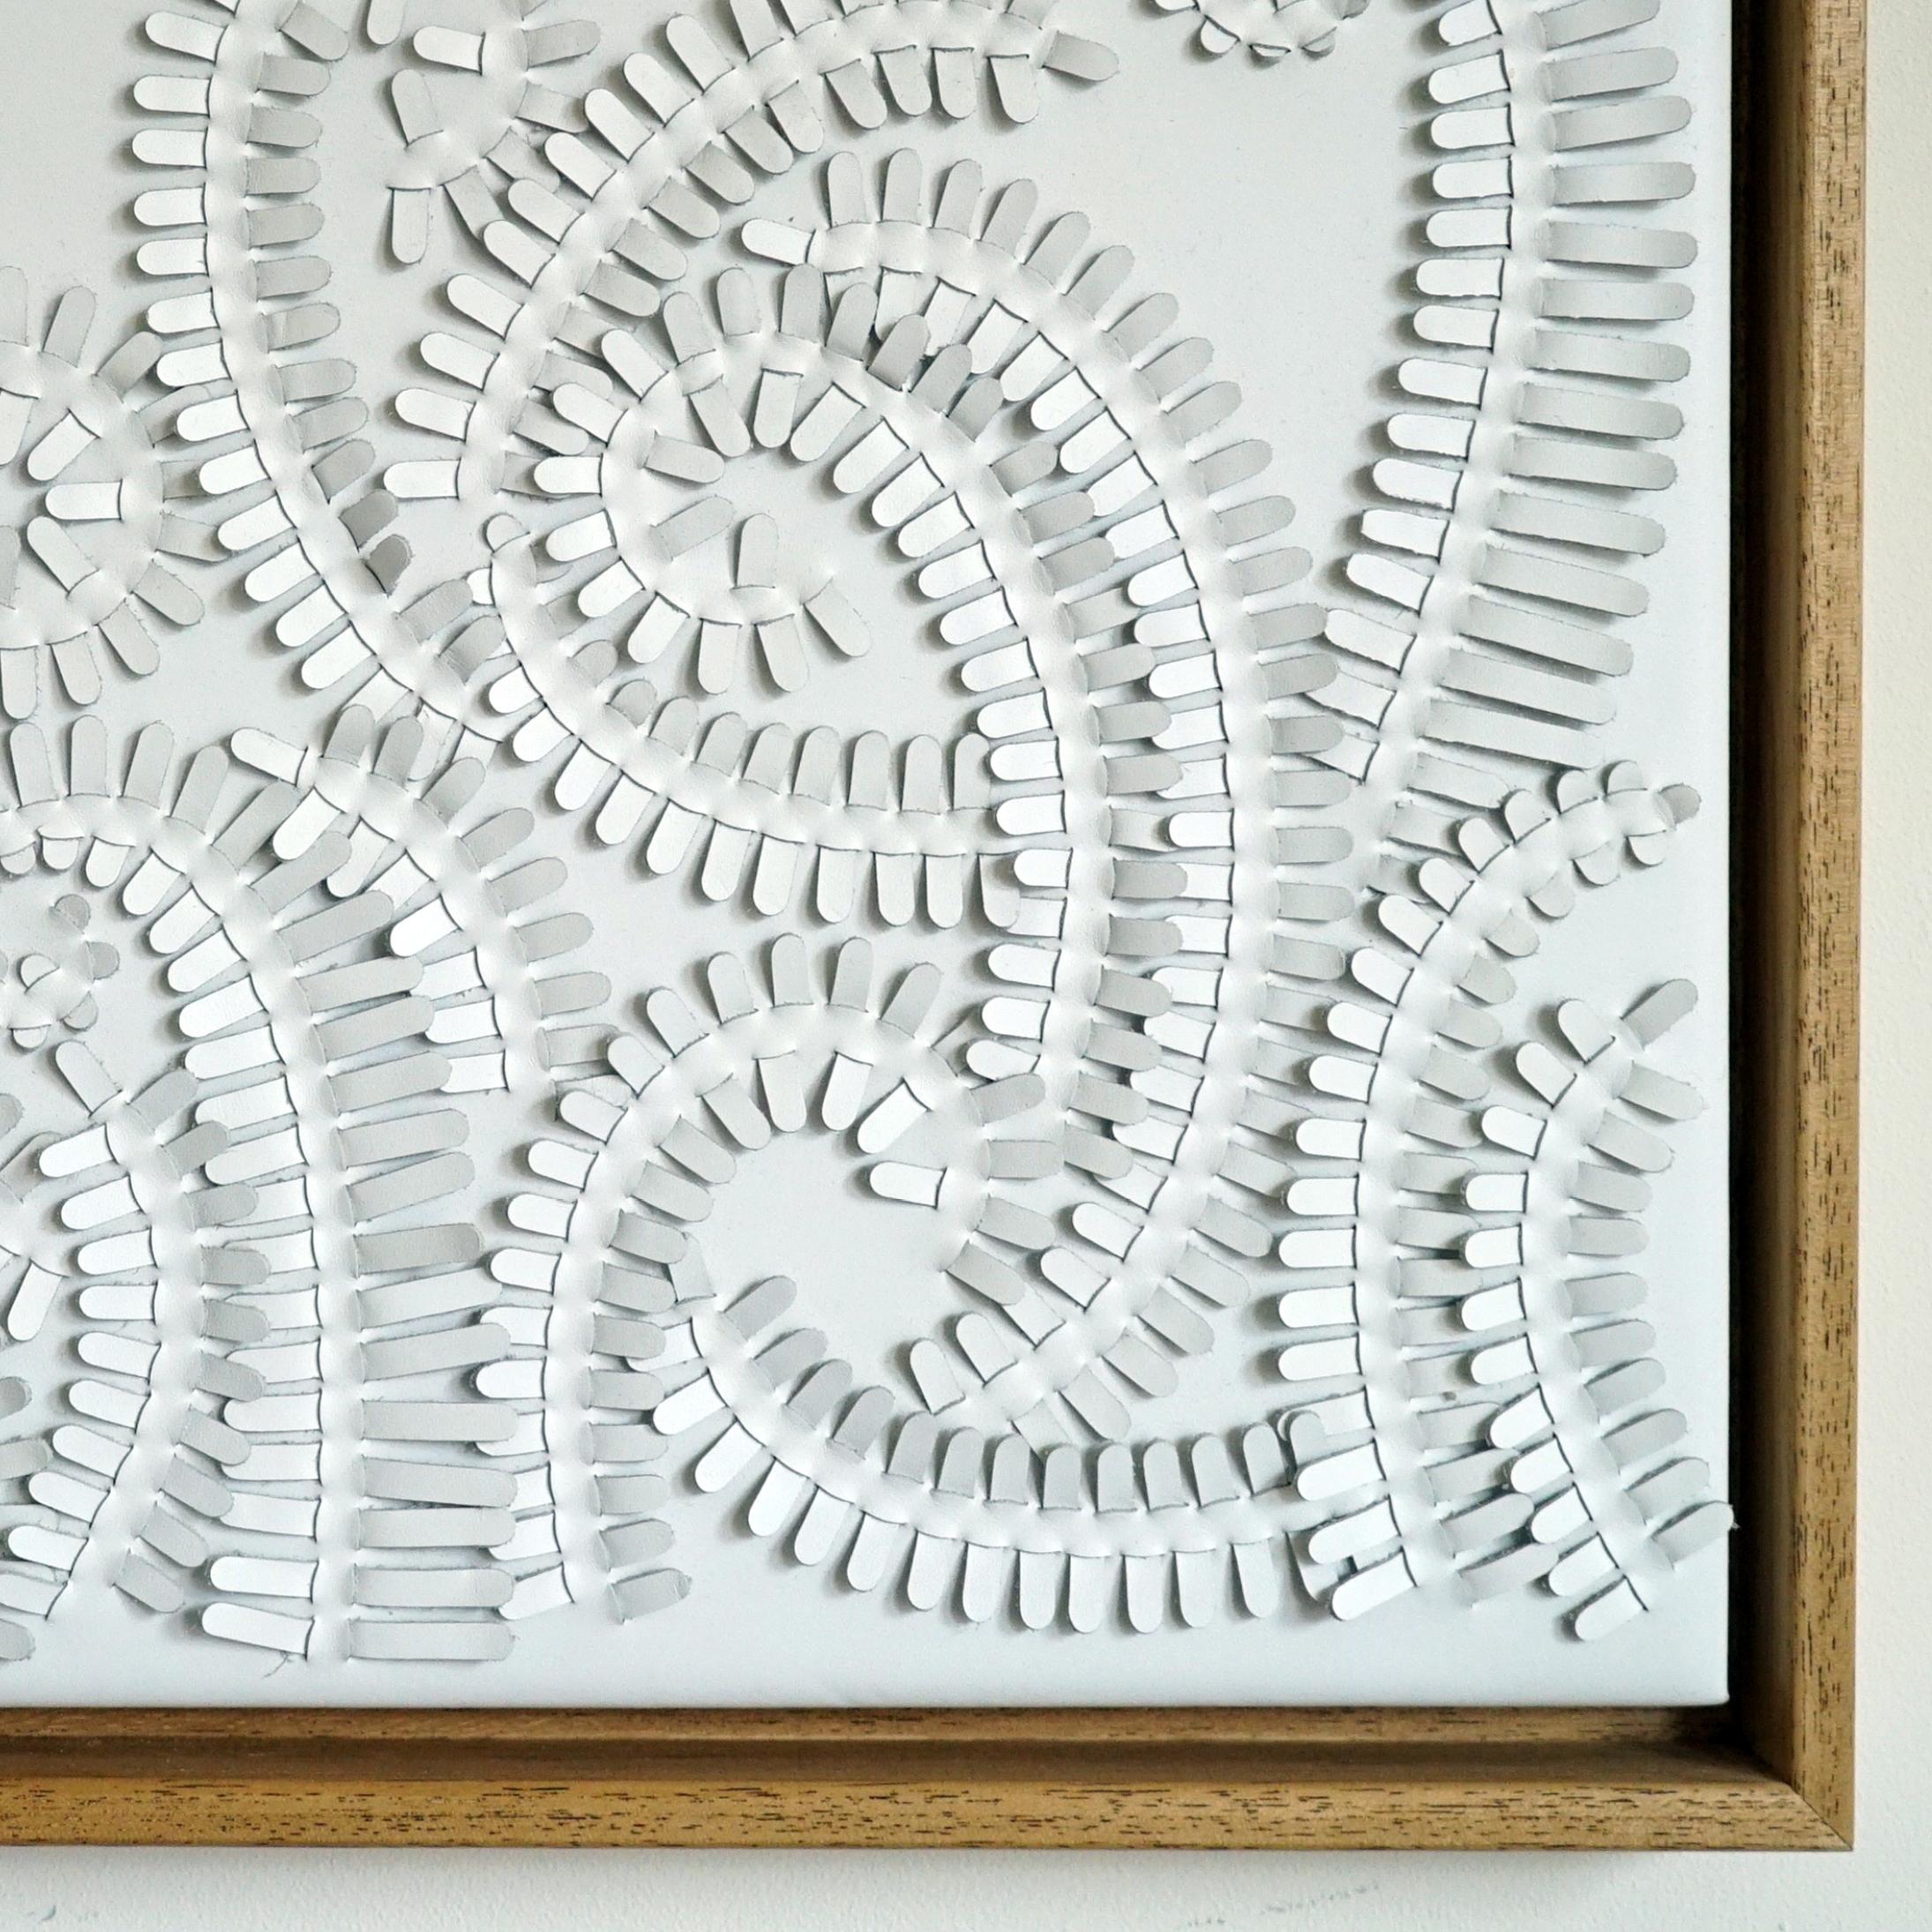 European Fern: A Piece of 3D Sculptural White Leather Wall Art For Sale